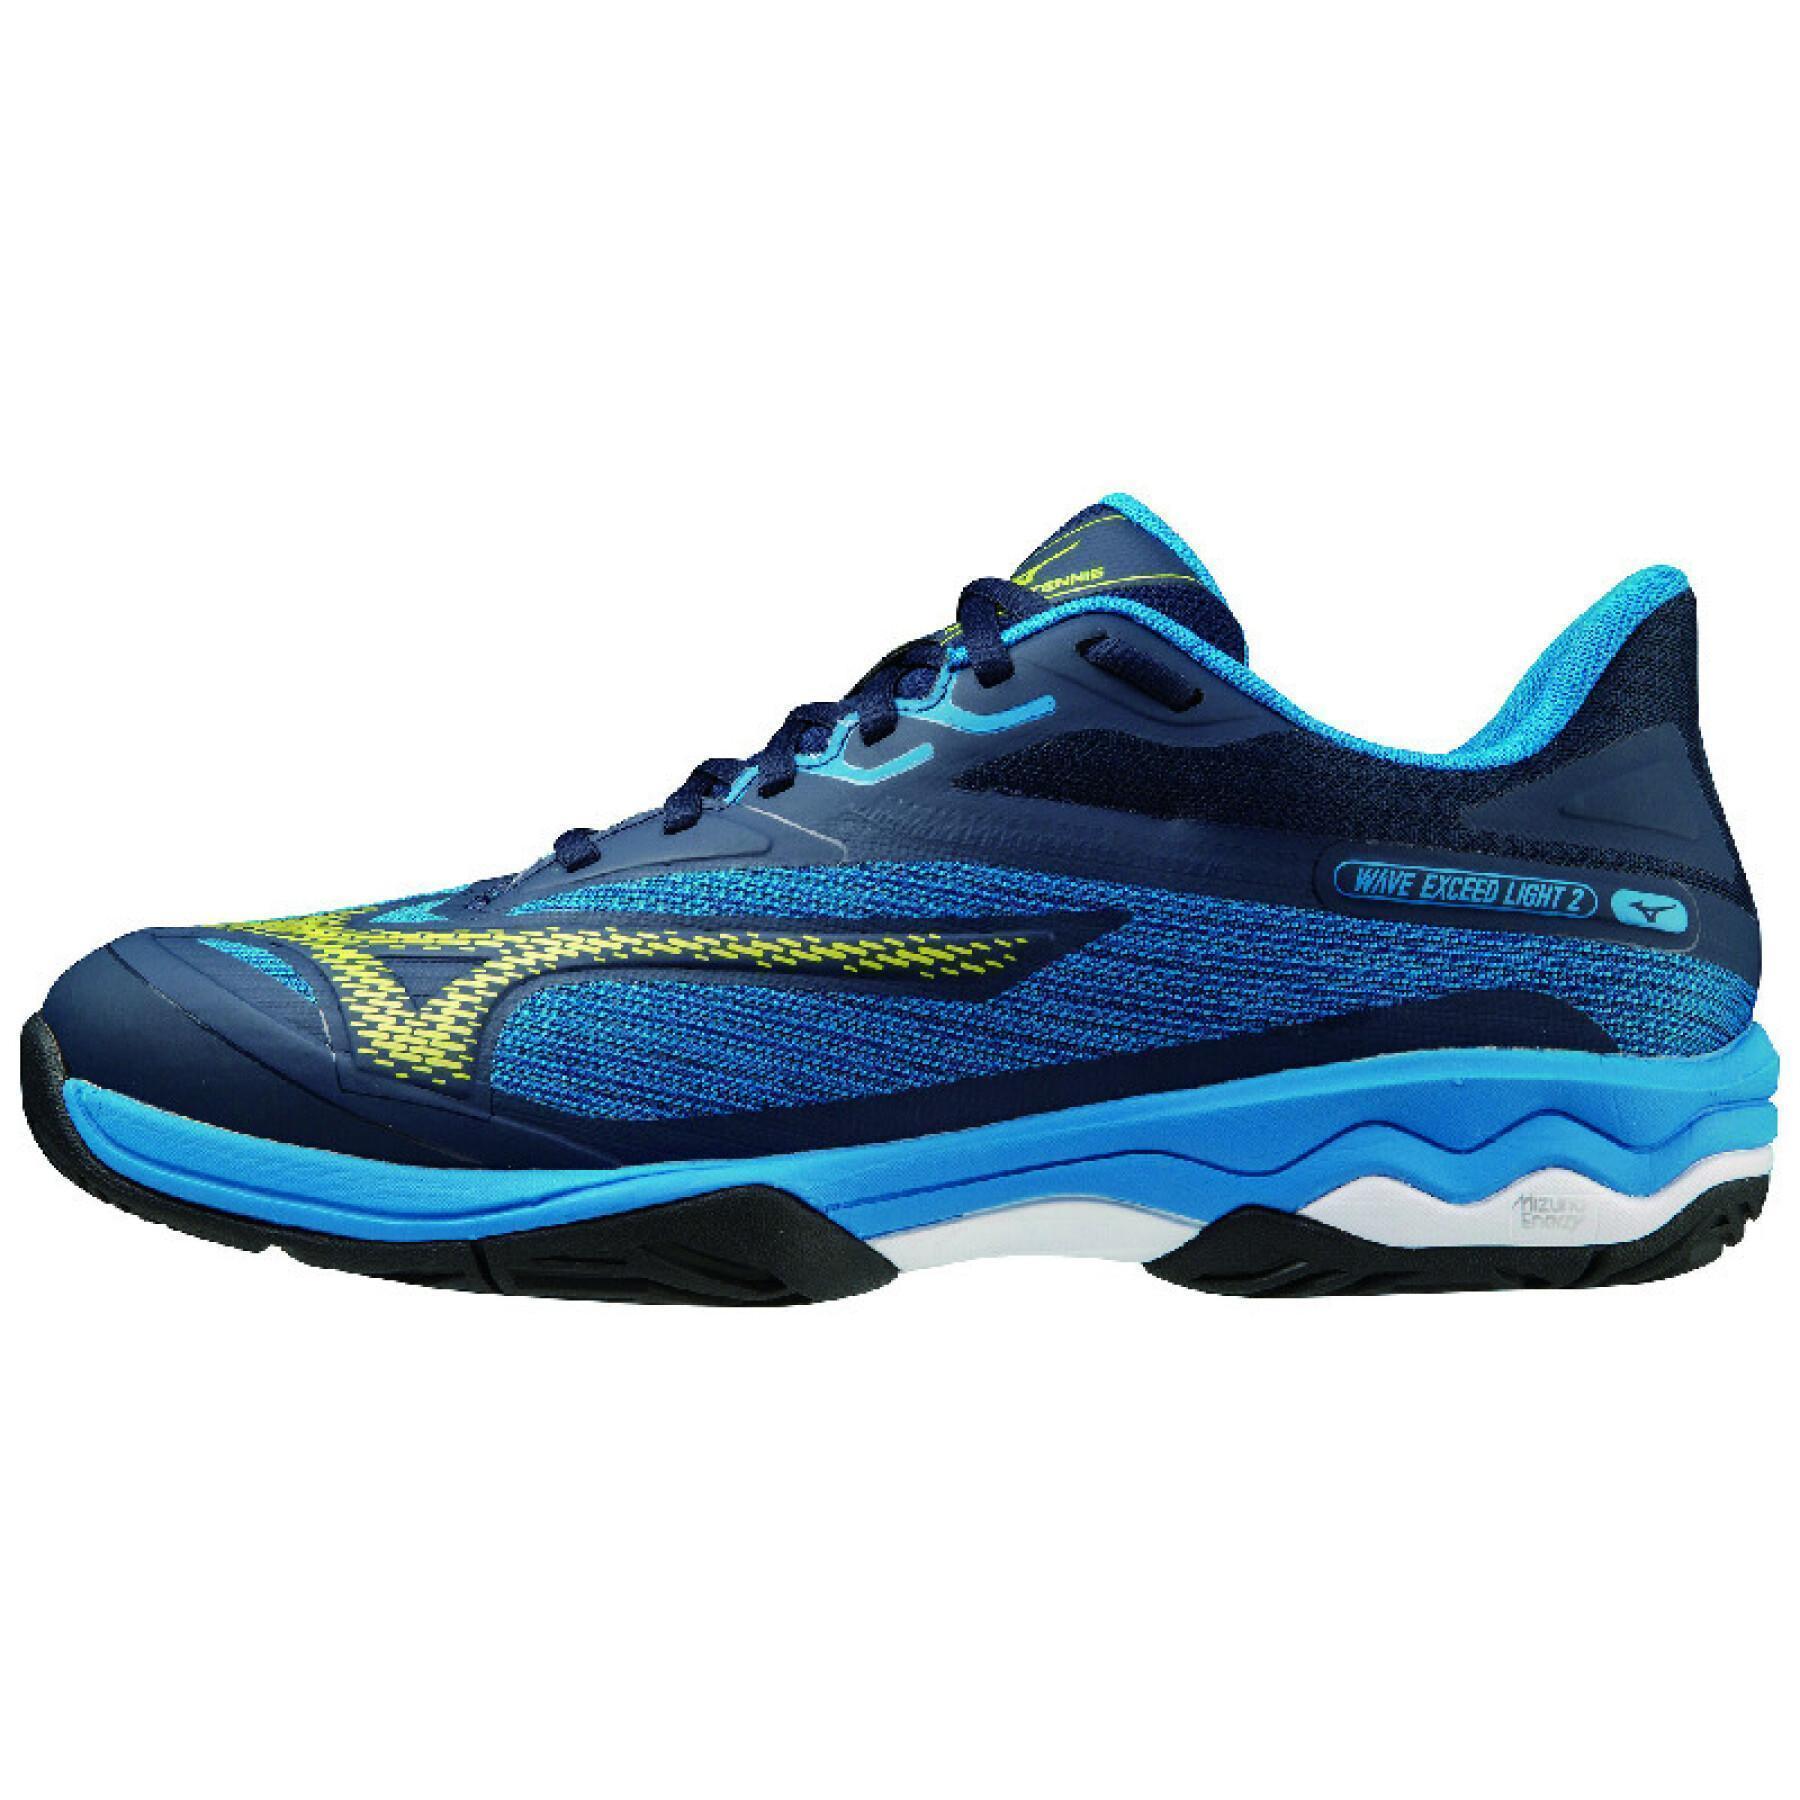 Tennis shoes Mizuno Wave Exceed Light AC